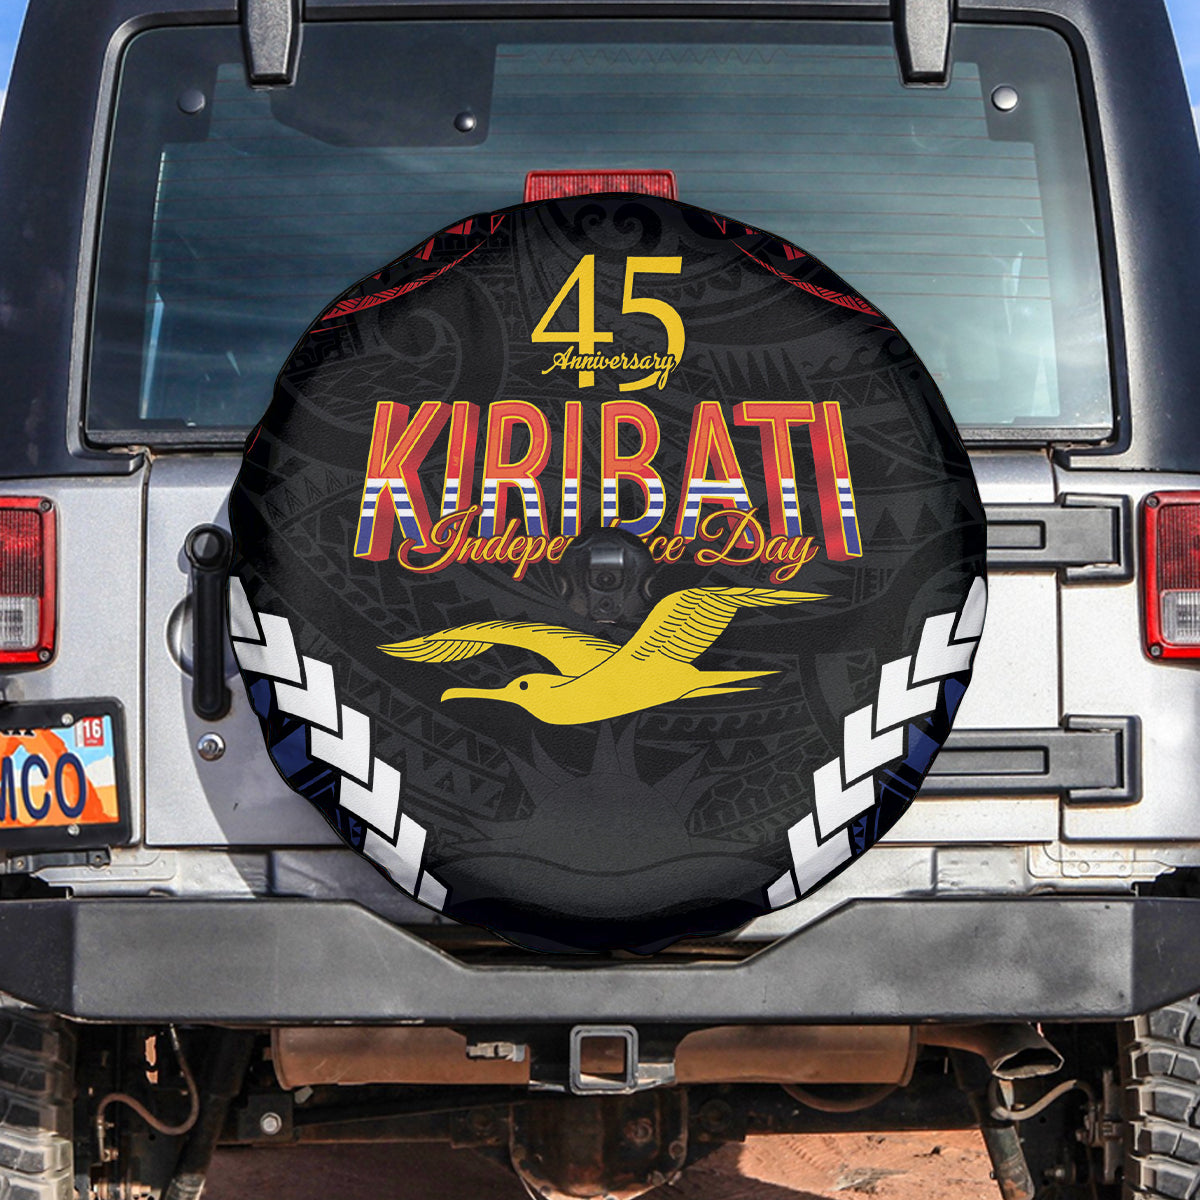 Kiribati 45th Anniversary Independence Day Spare Tire Cover Since 1979